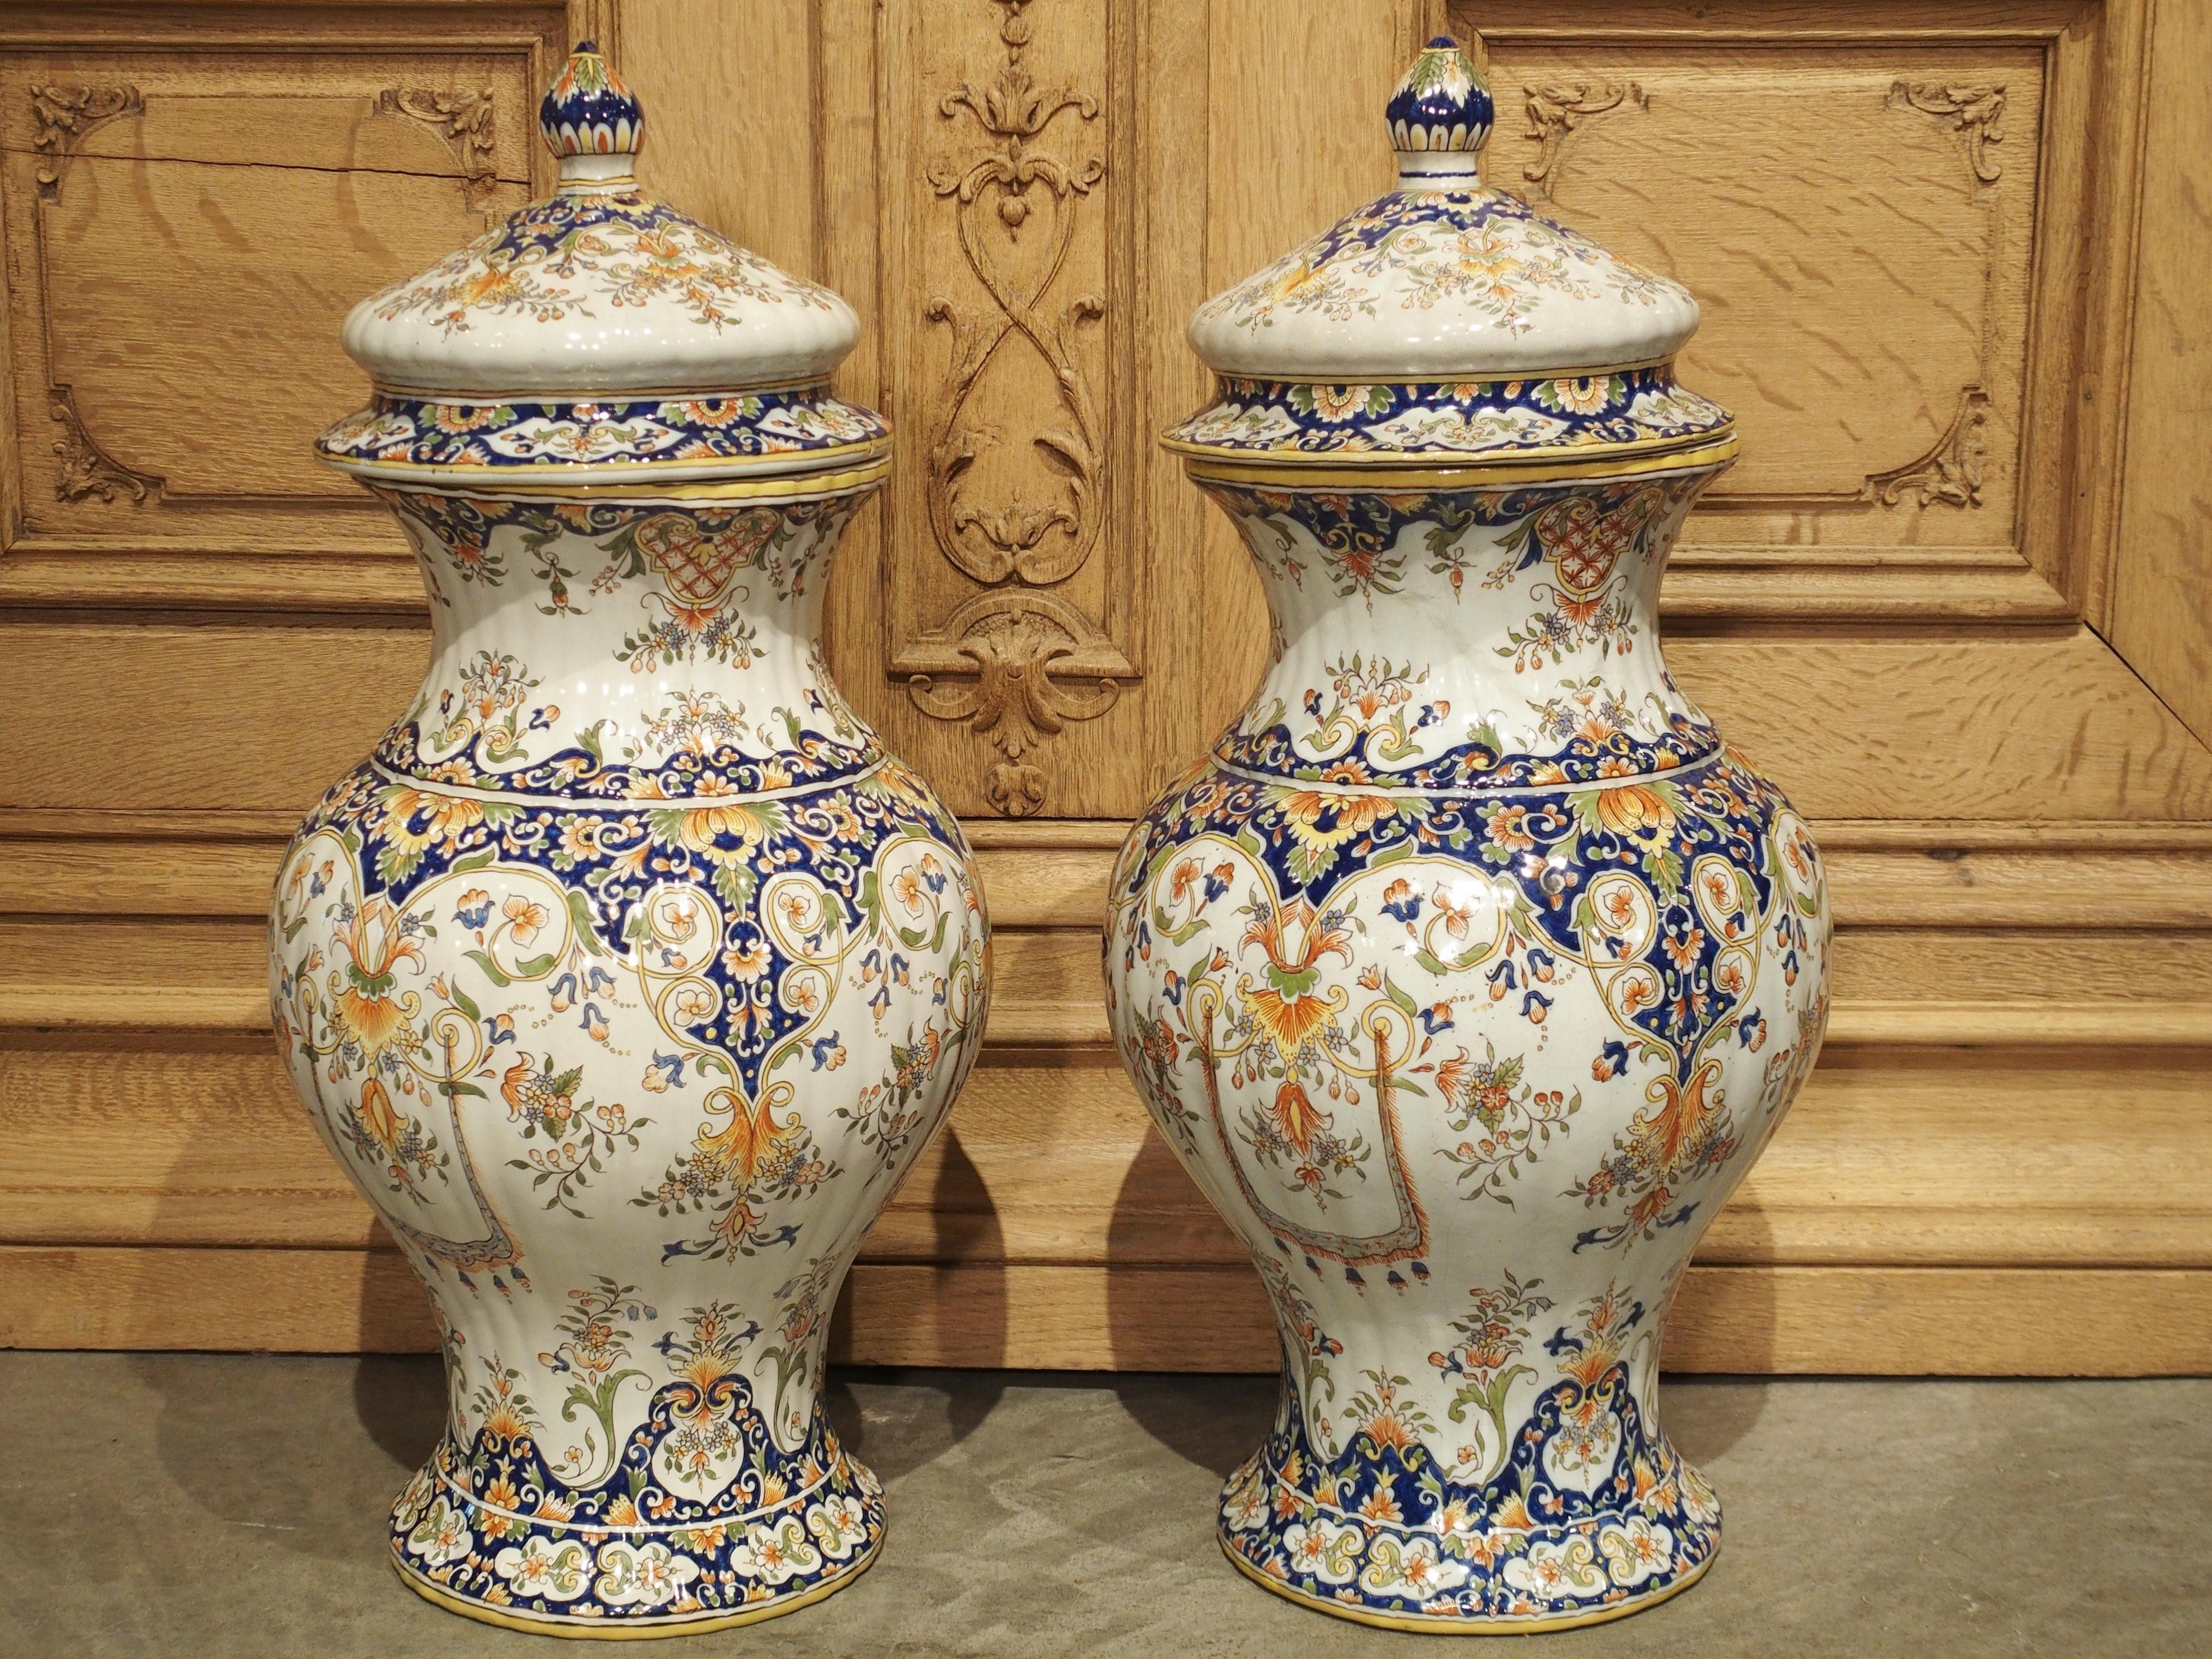 Pair of Antique Faience Lidded Urns from Desvres, France, Circa 1880 10